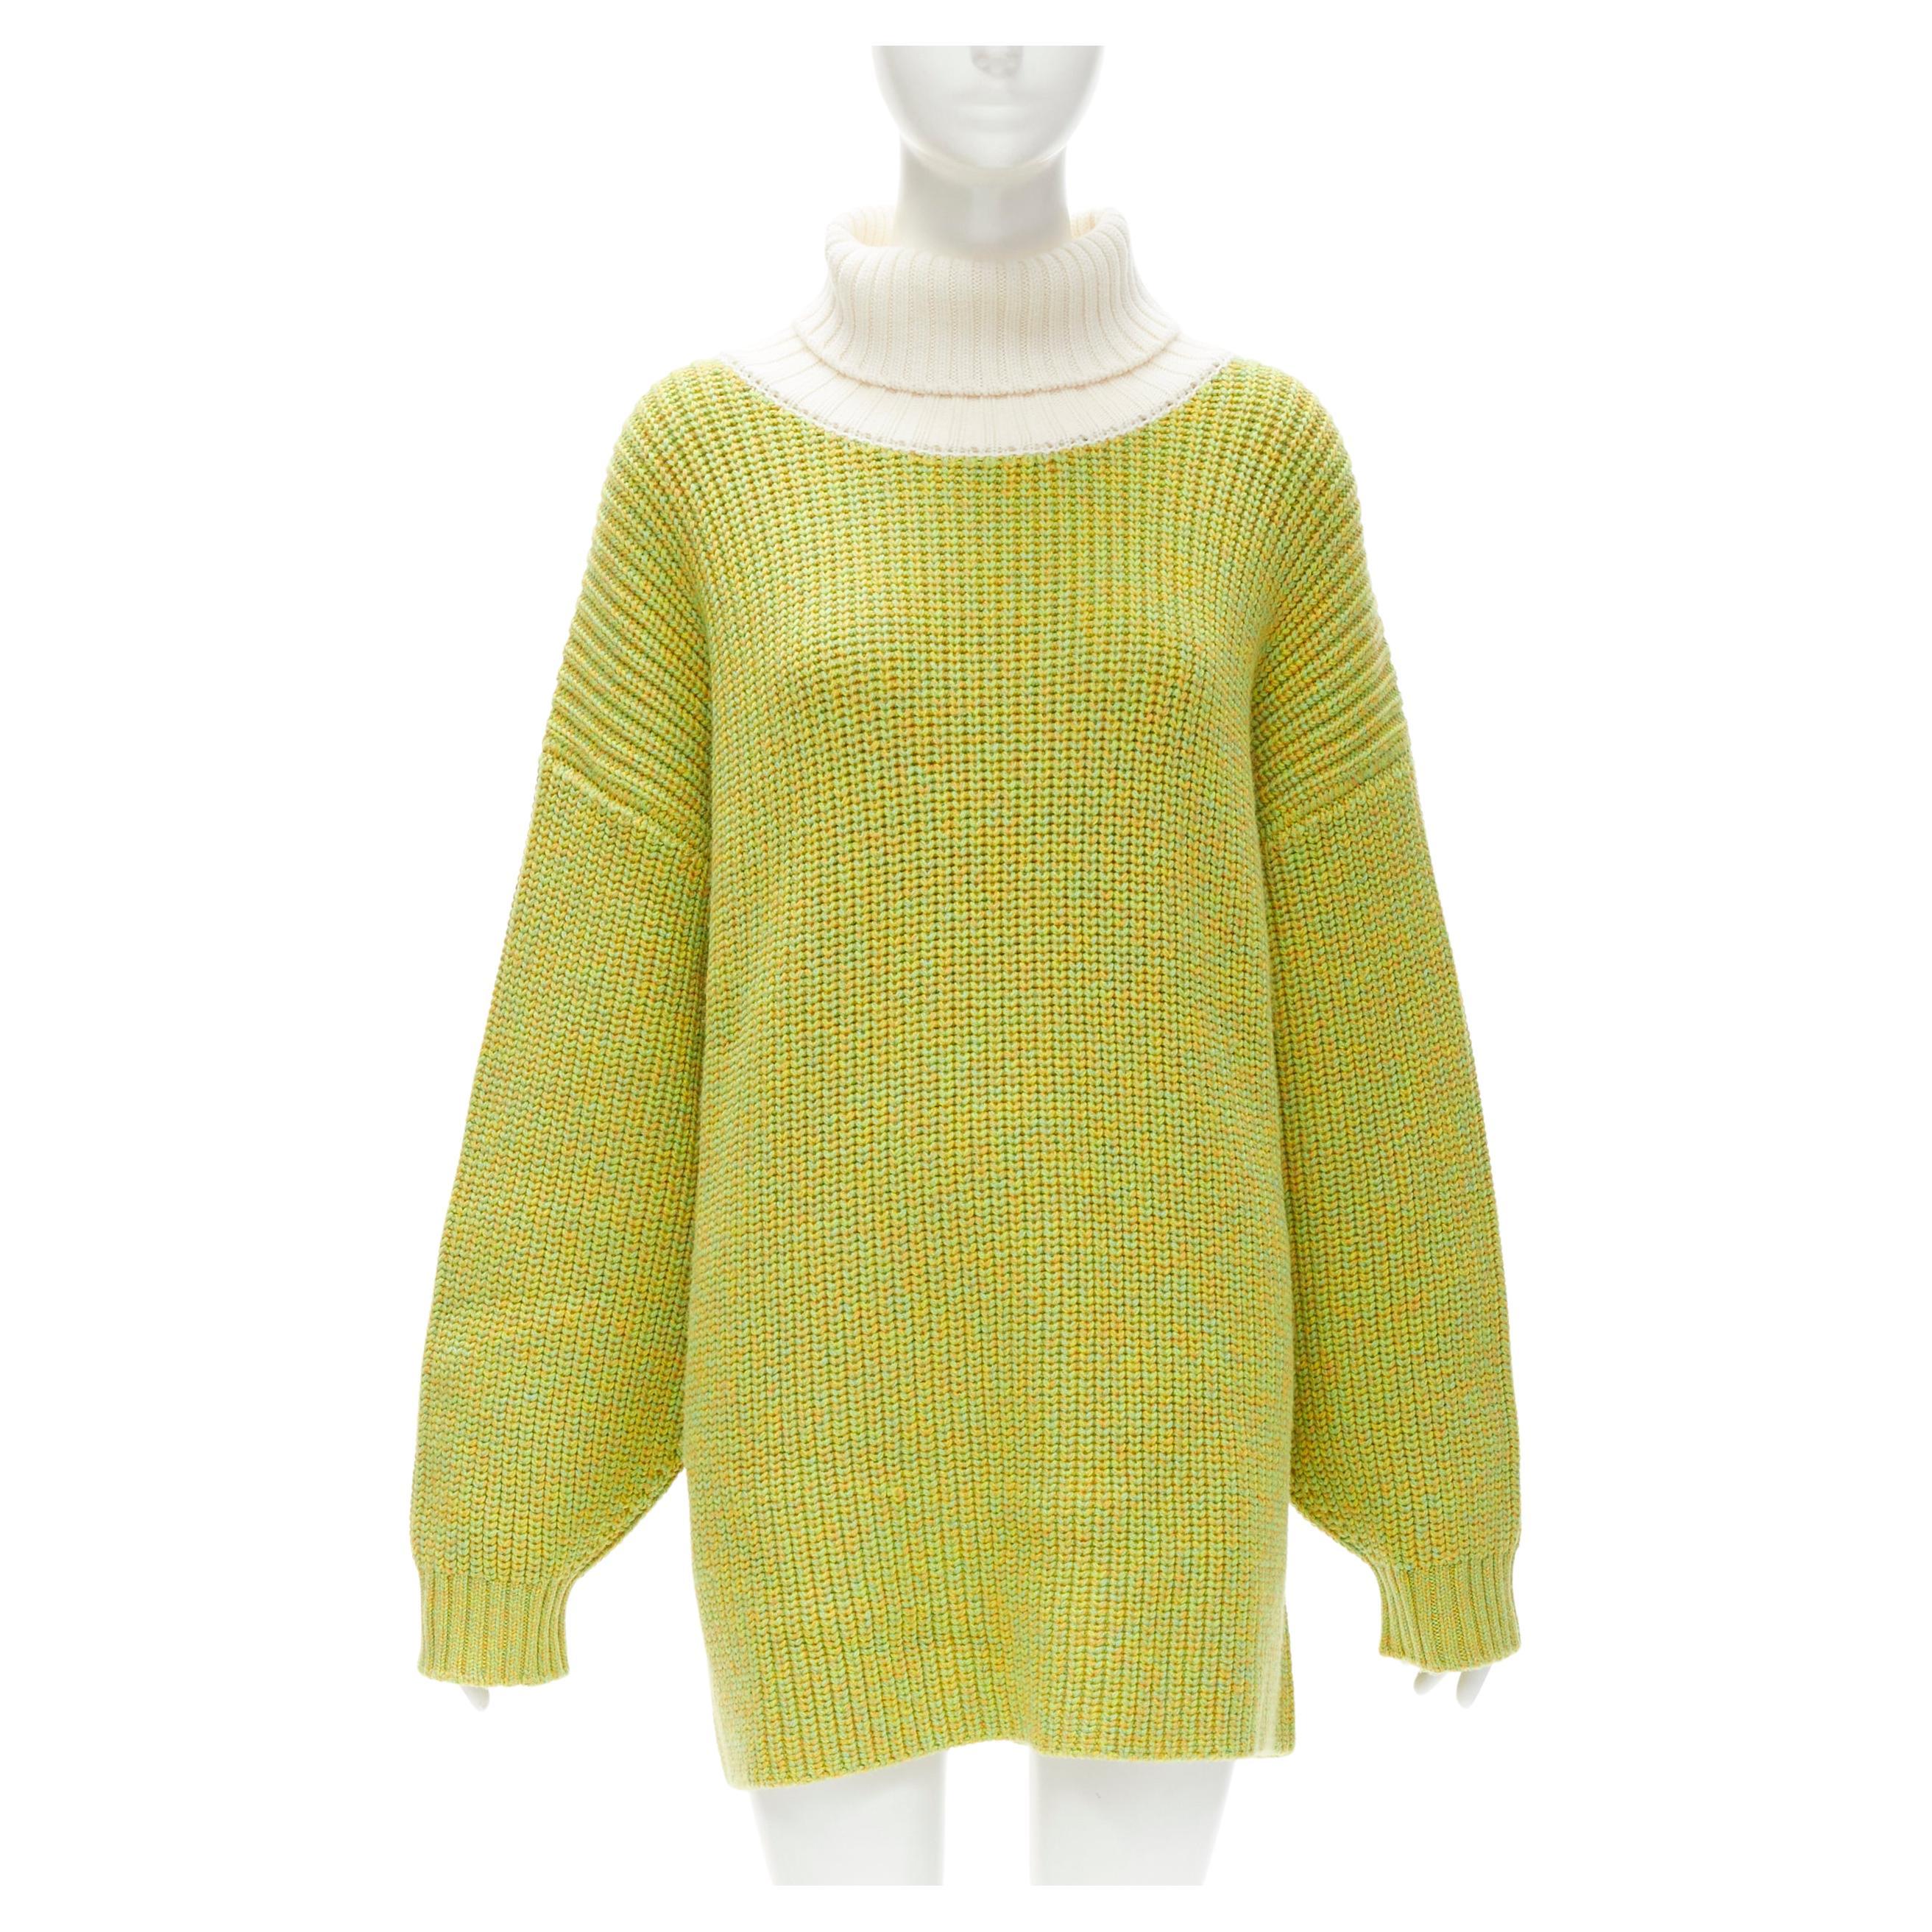 TIBI 100% merino wool lime yellow contrast rolled turtleneck sweater M/L For Sale